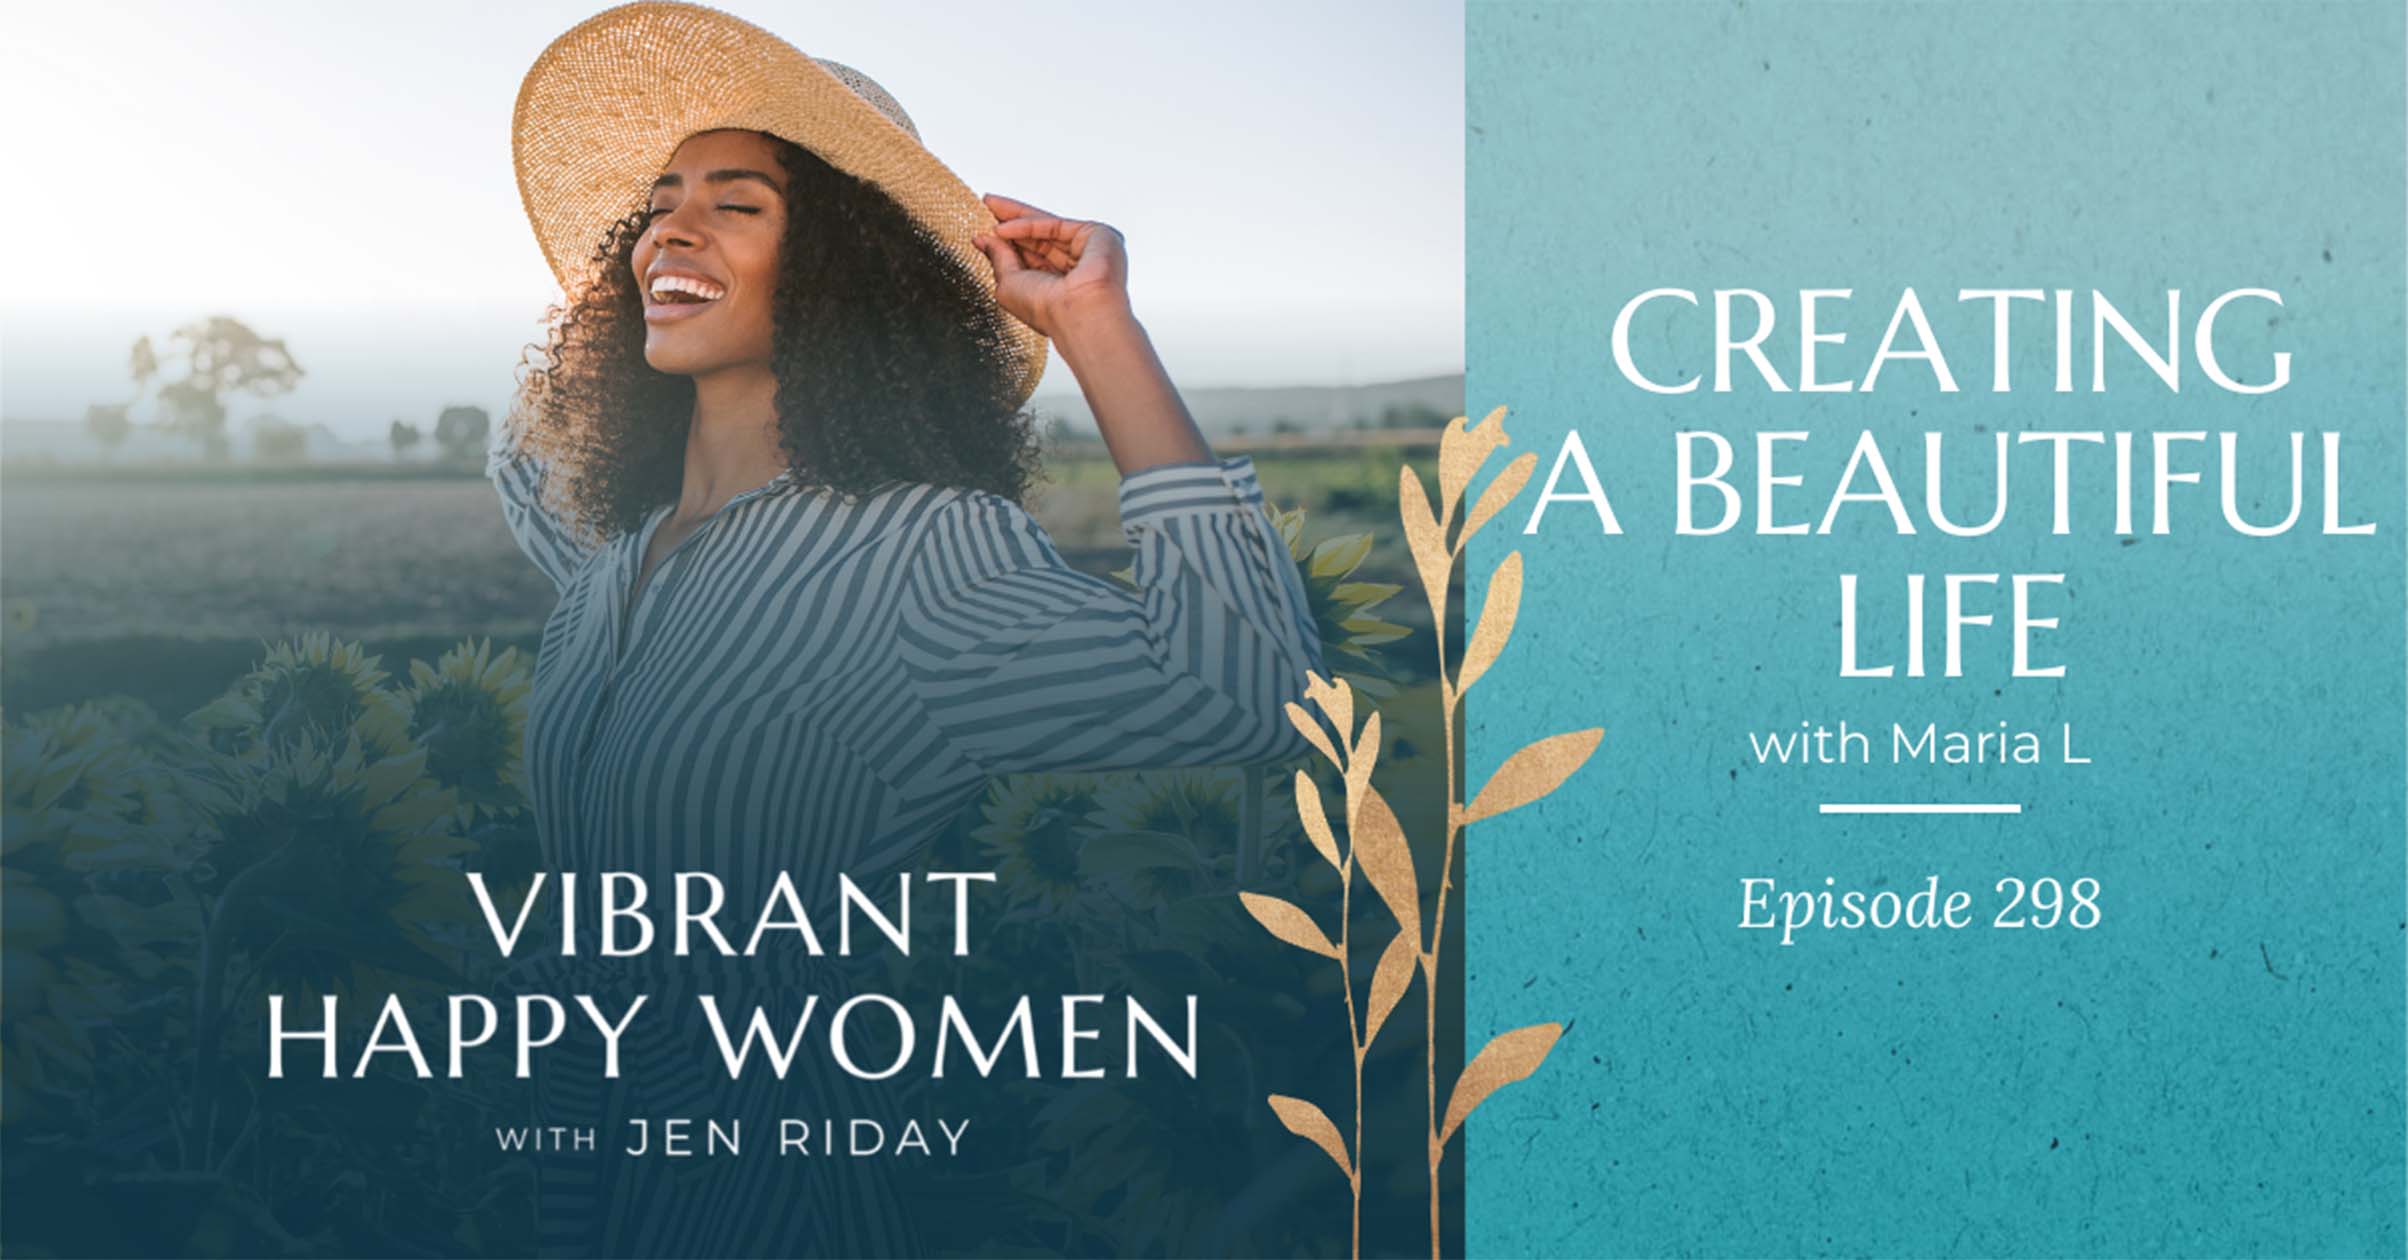 Vibrant Happy Women with Dr. Jen Riday | Creating a Beautiful Life (with Maria L)